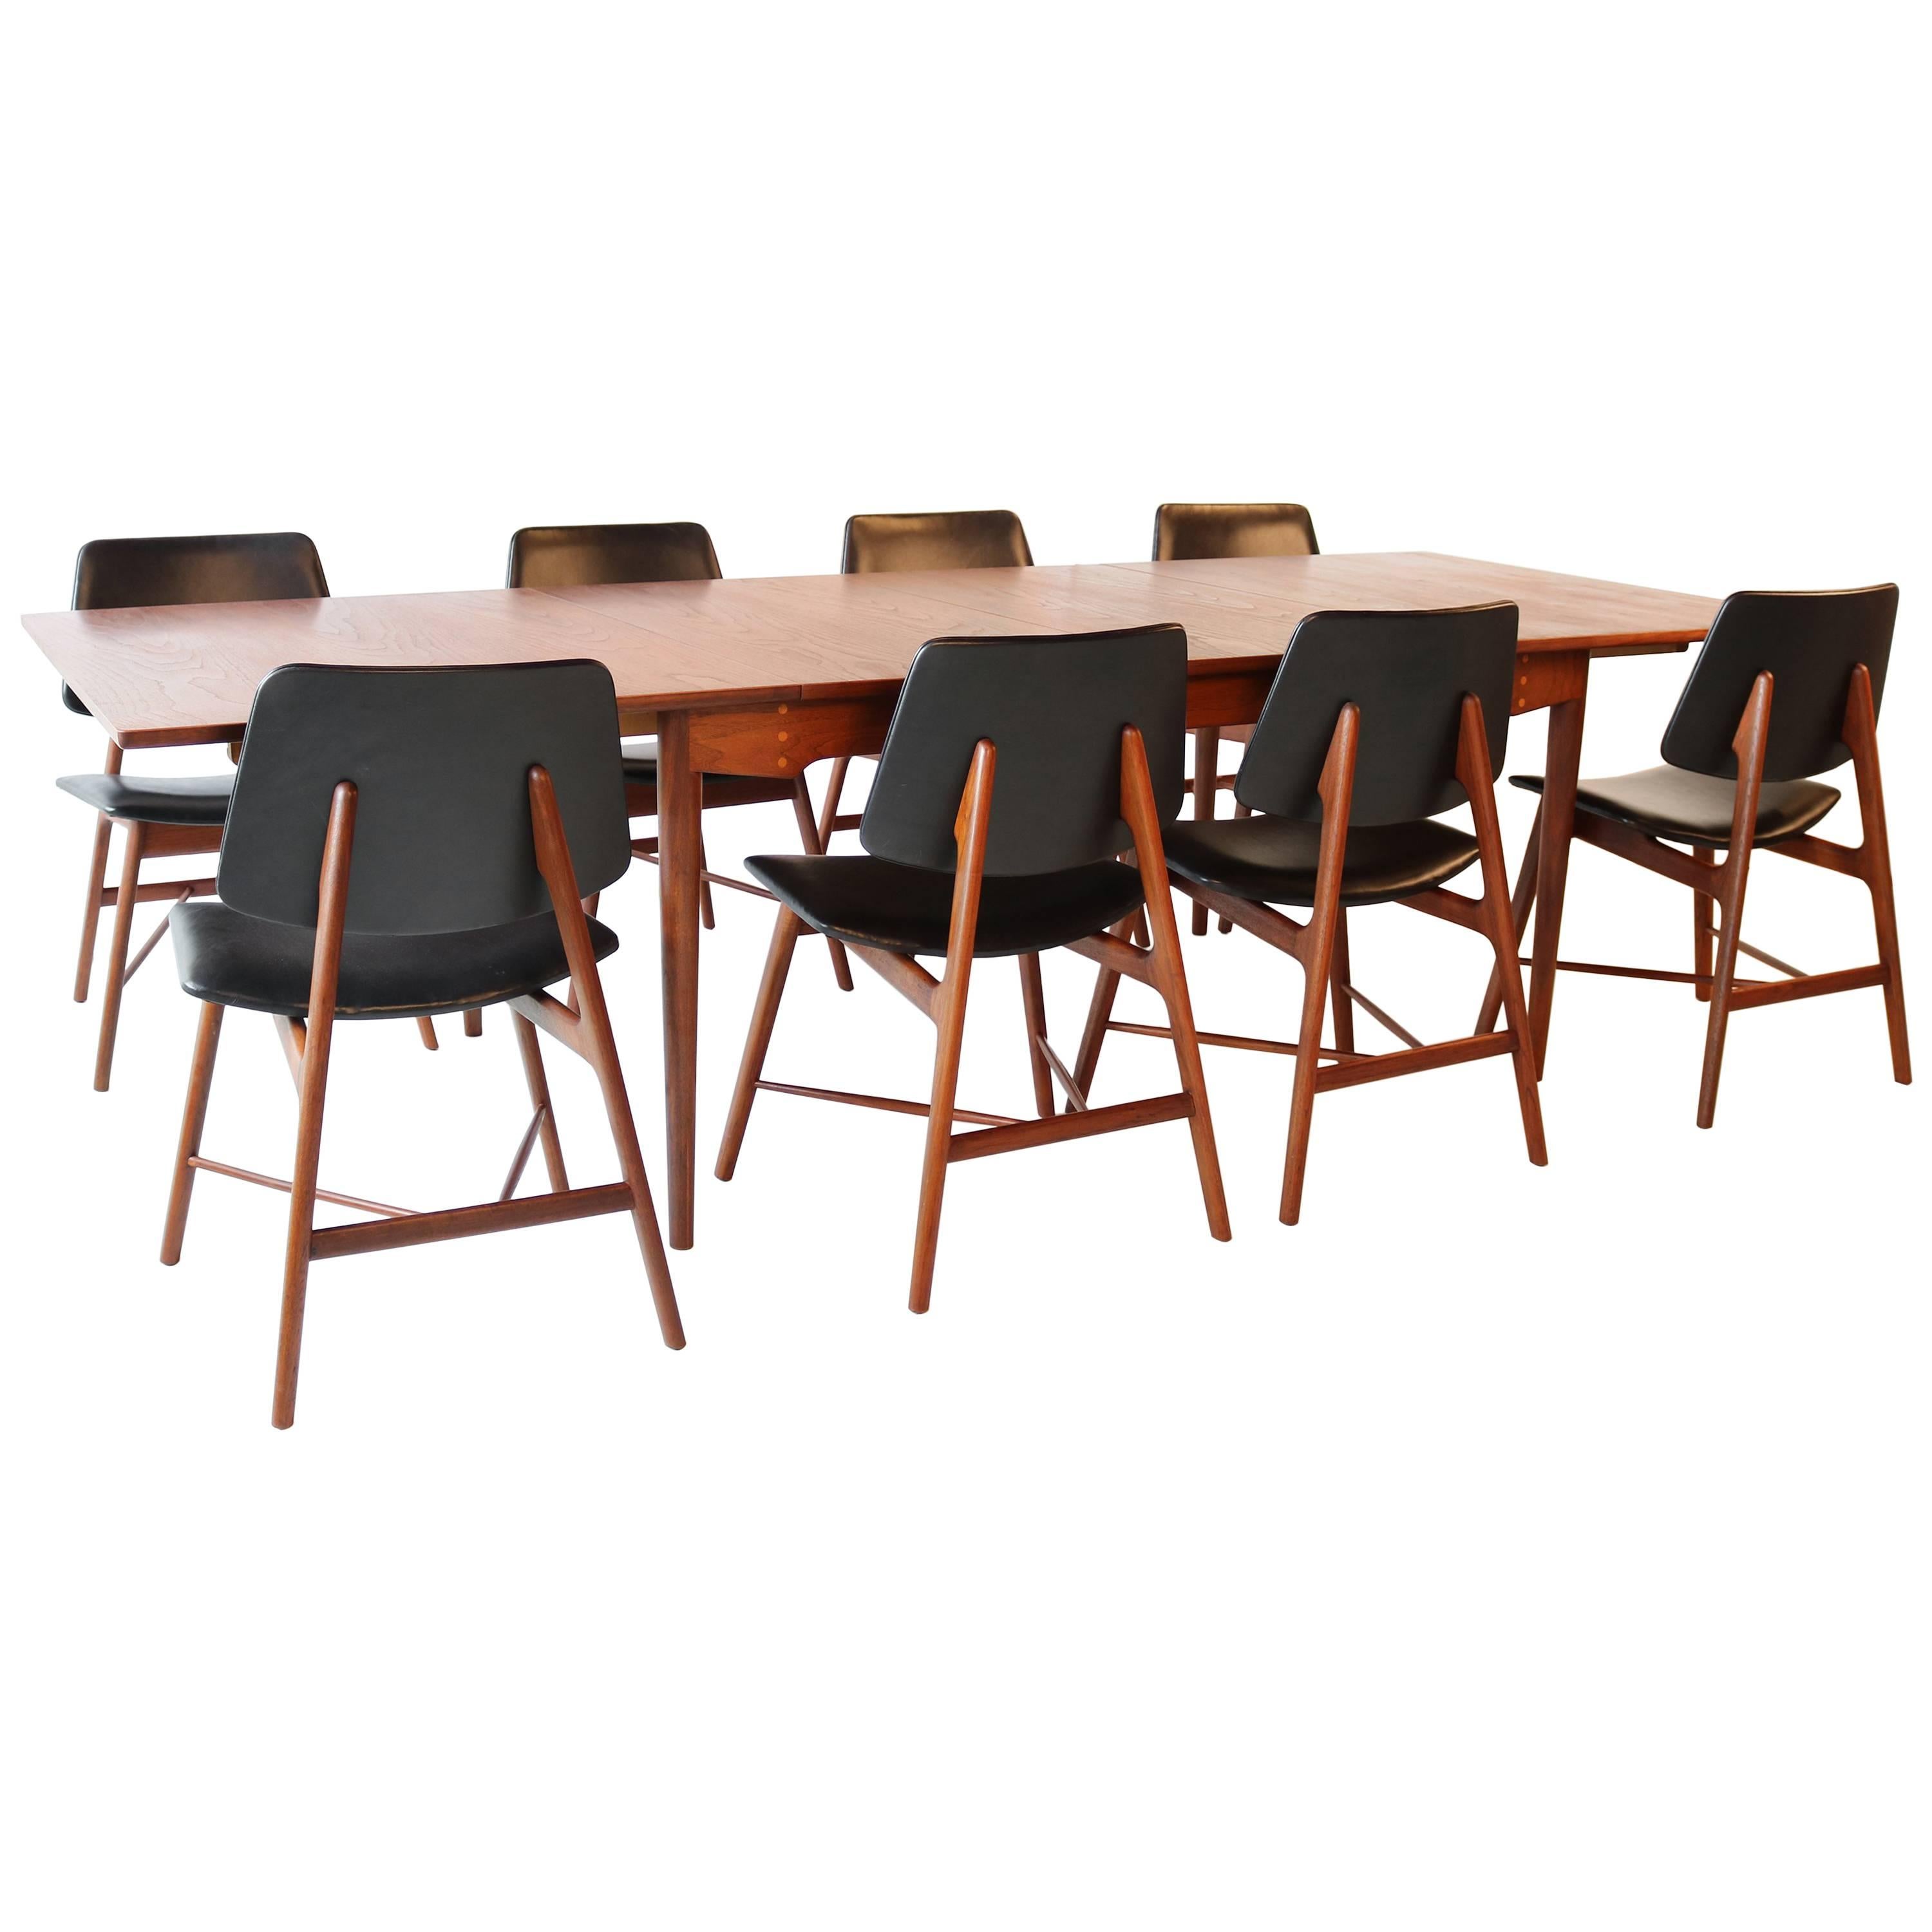 Finn Juhl Complete Dining Set Including Table and Eight Chairs